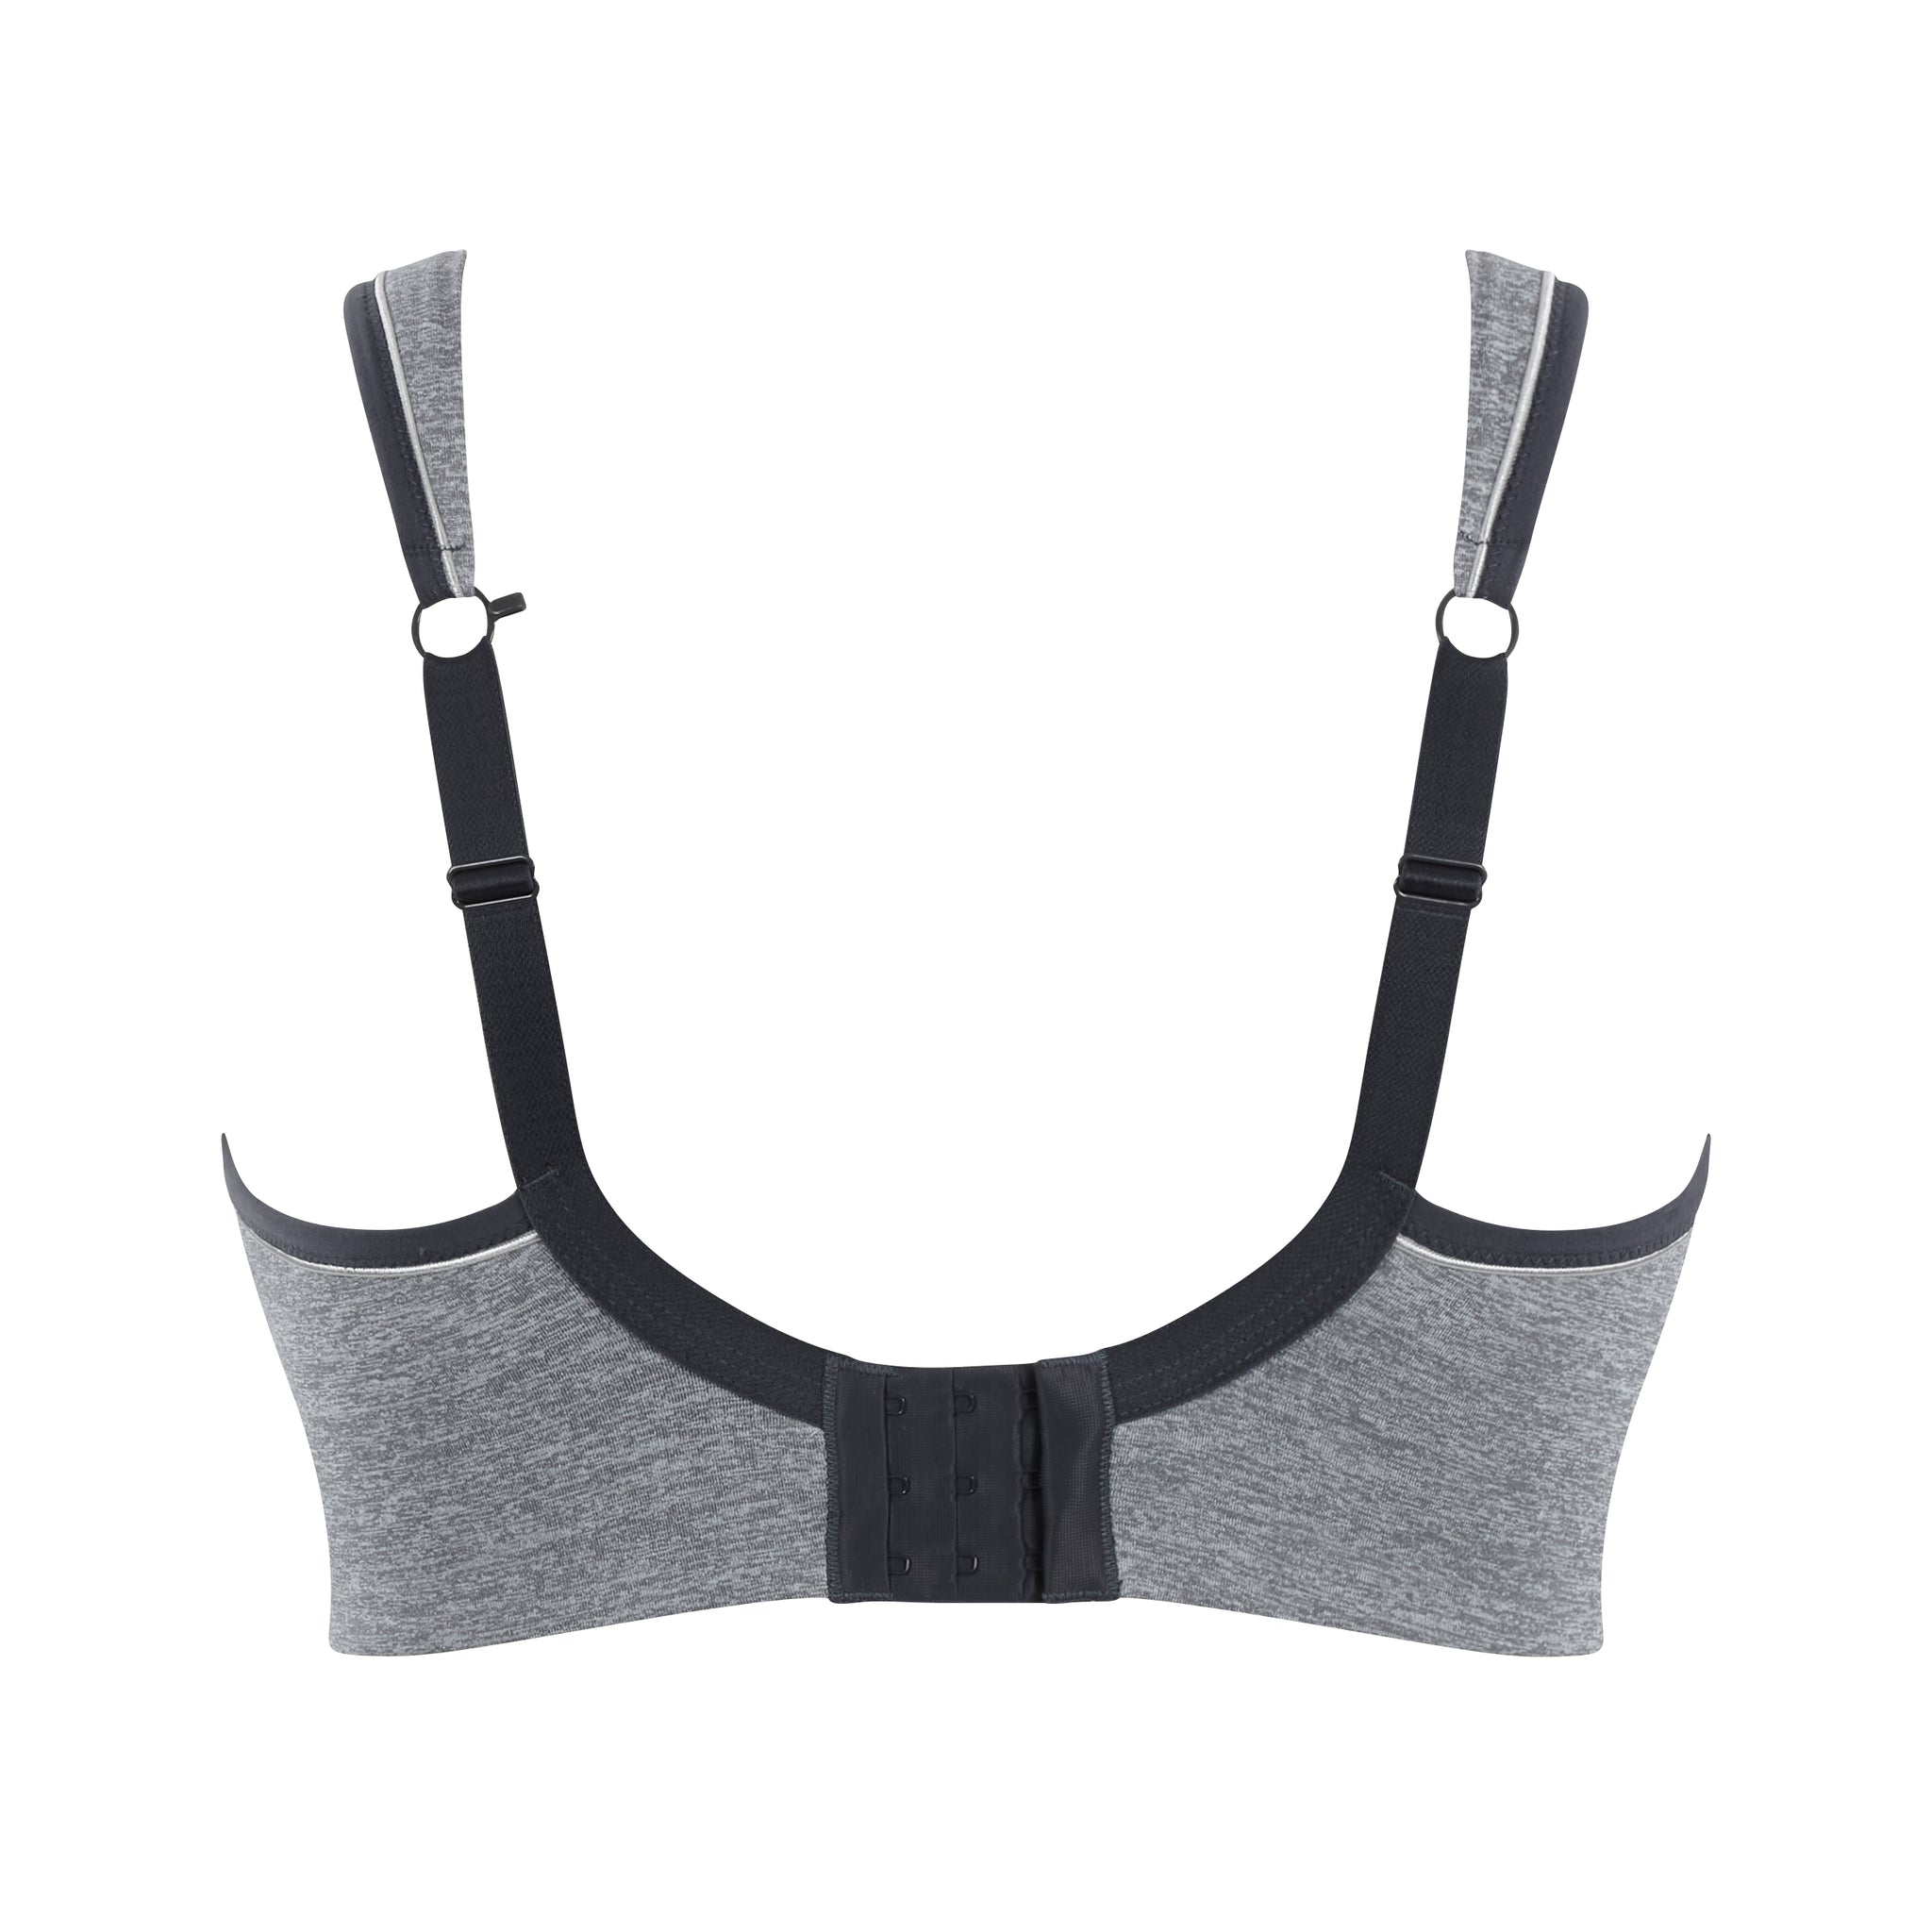 Review of the Sculptresse Non Padded Underwired Sports Bra 